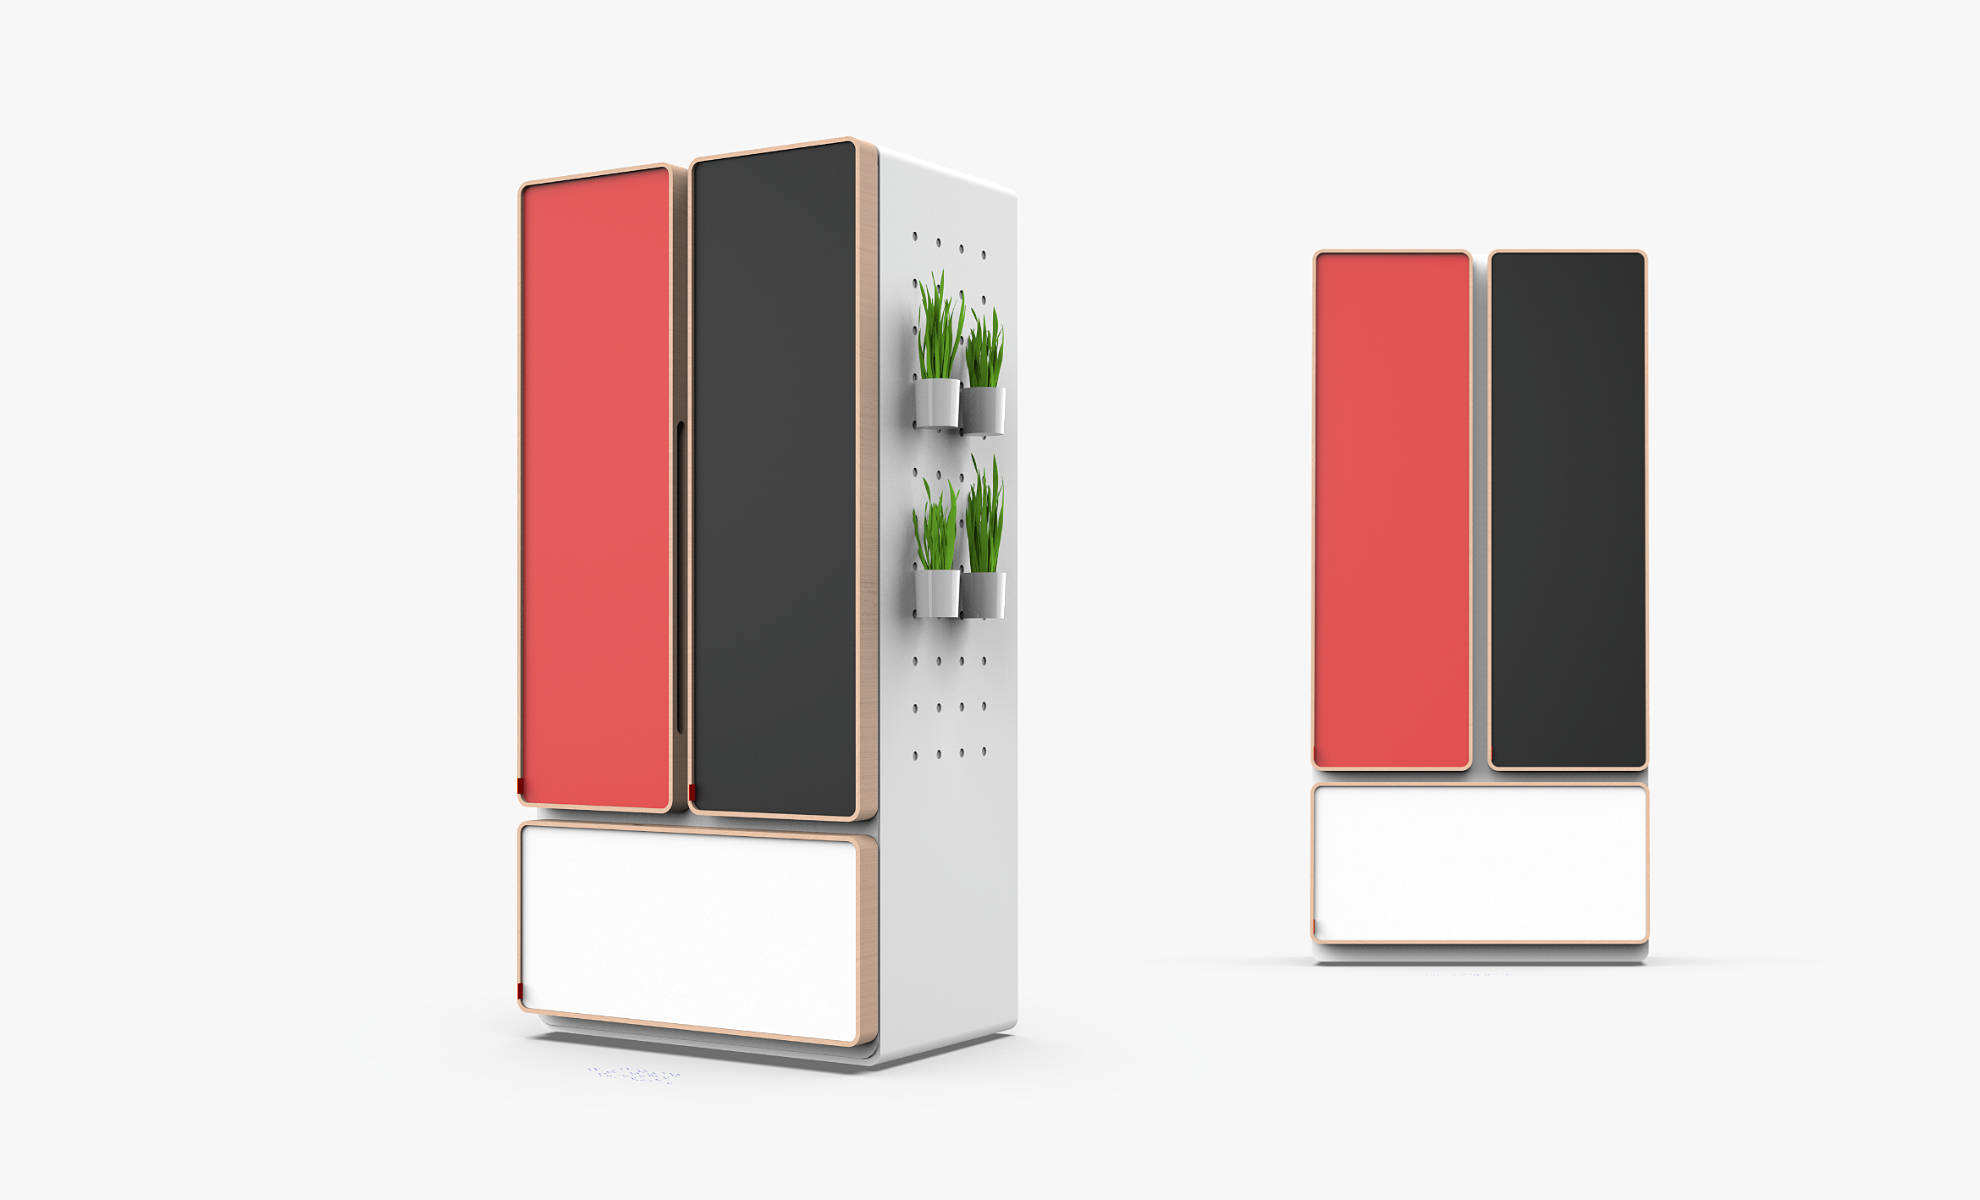 Design study refrigerator with furniture character